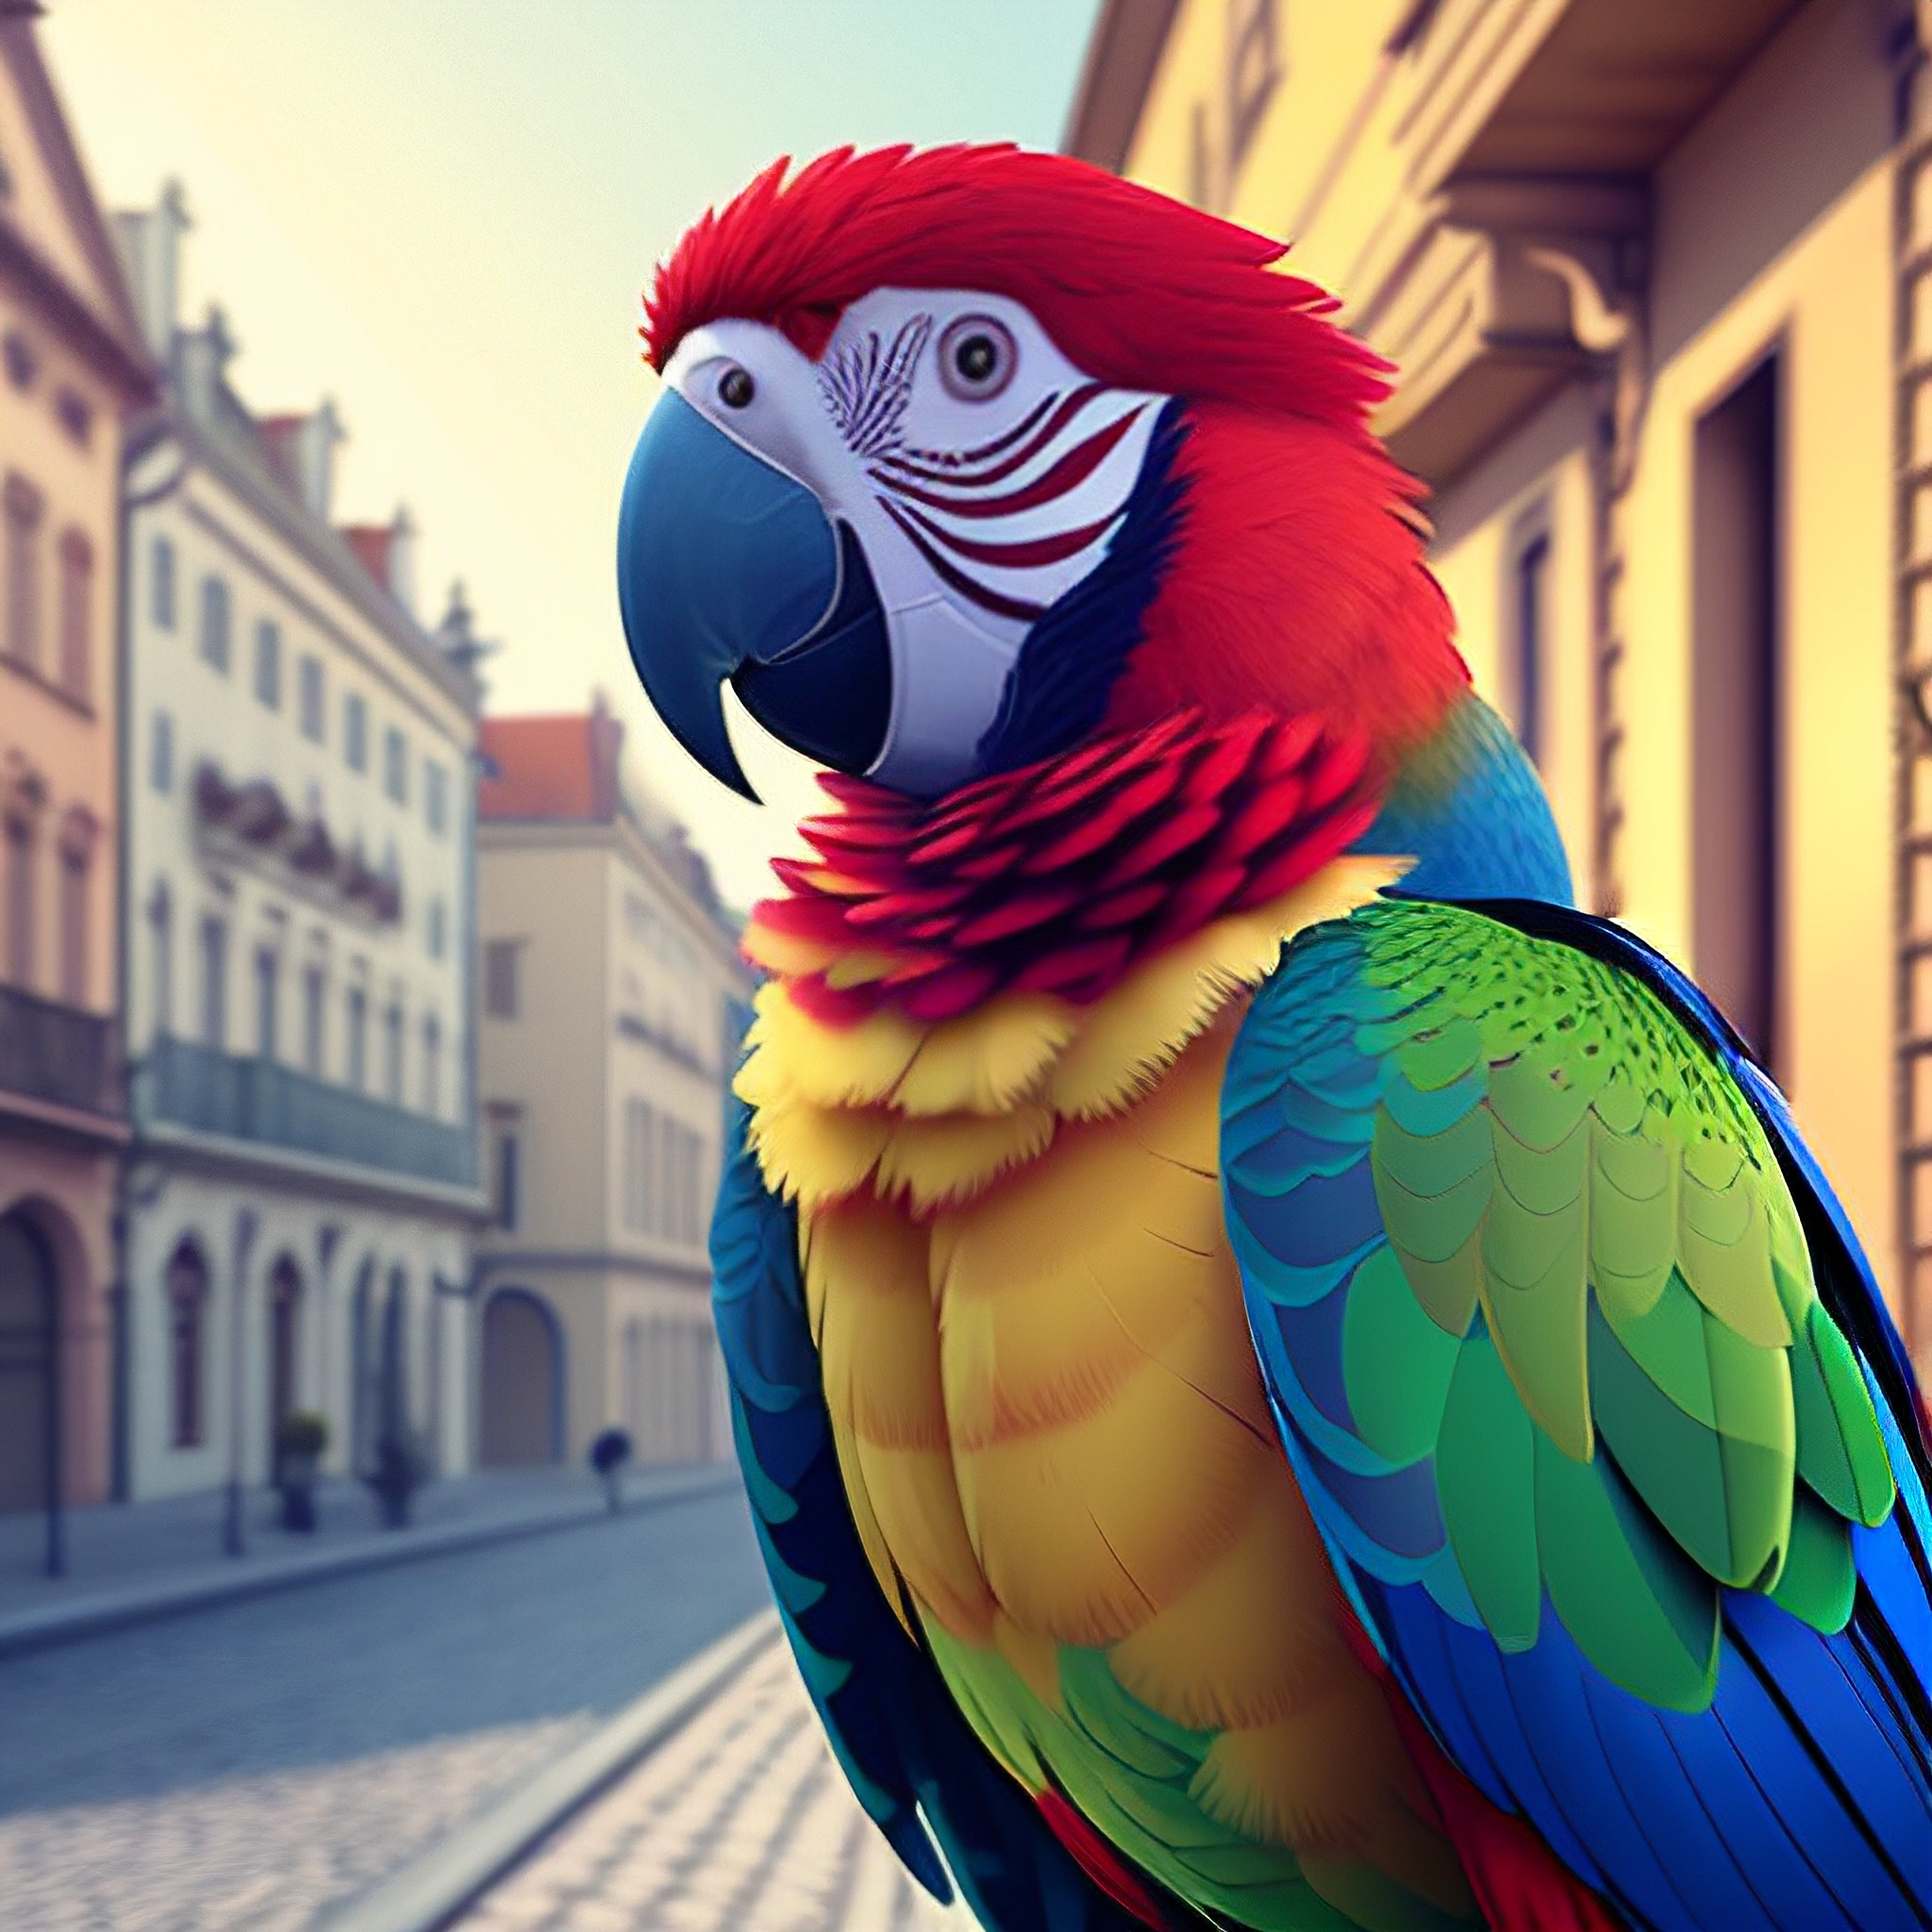 brightly colored parrot sitting on a ledge in front of a building